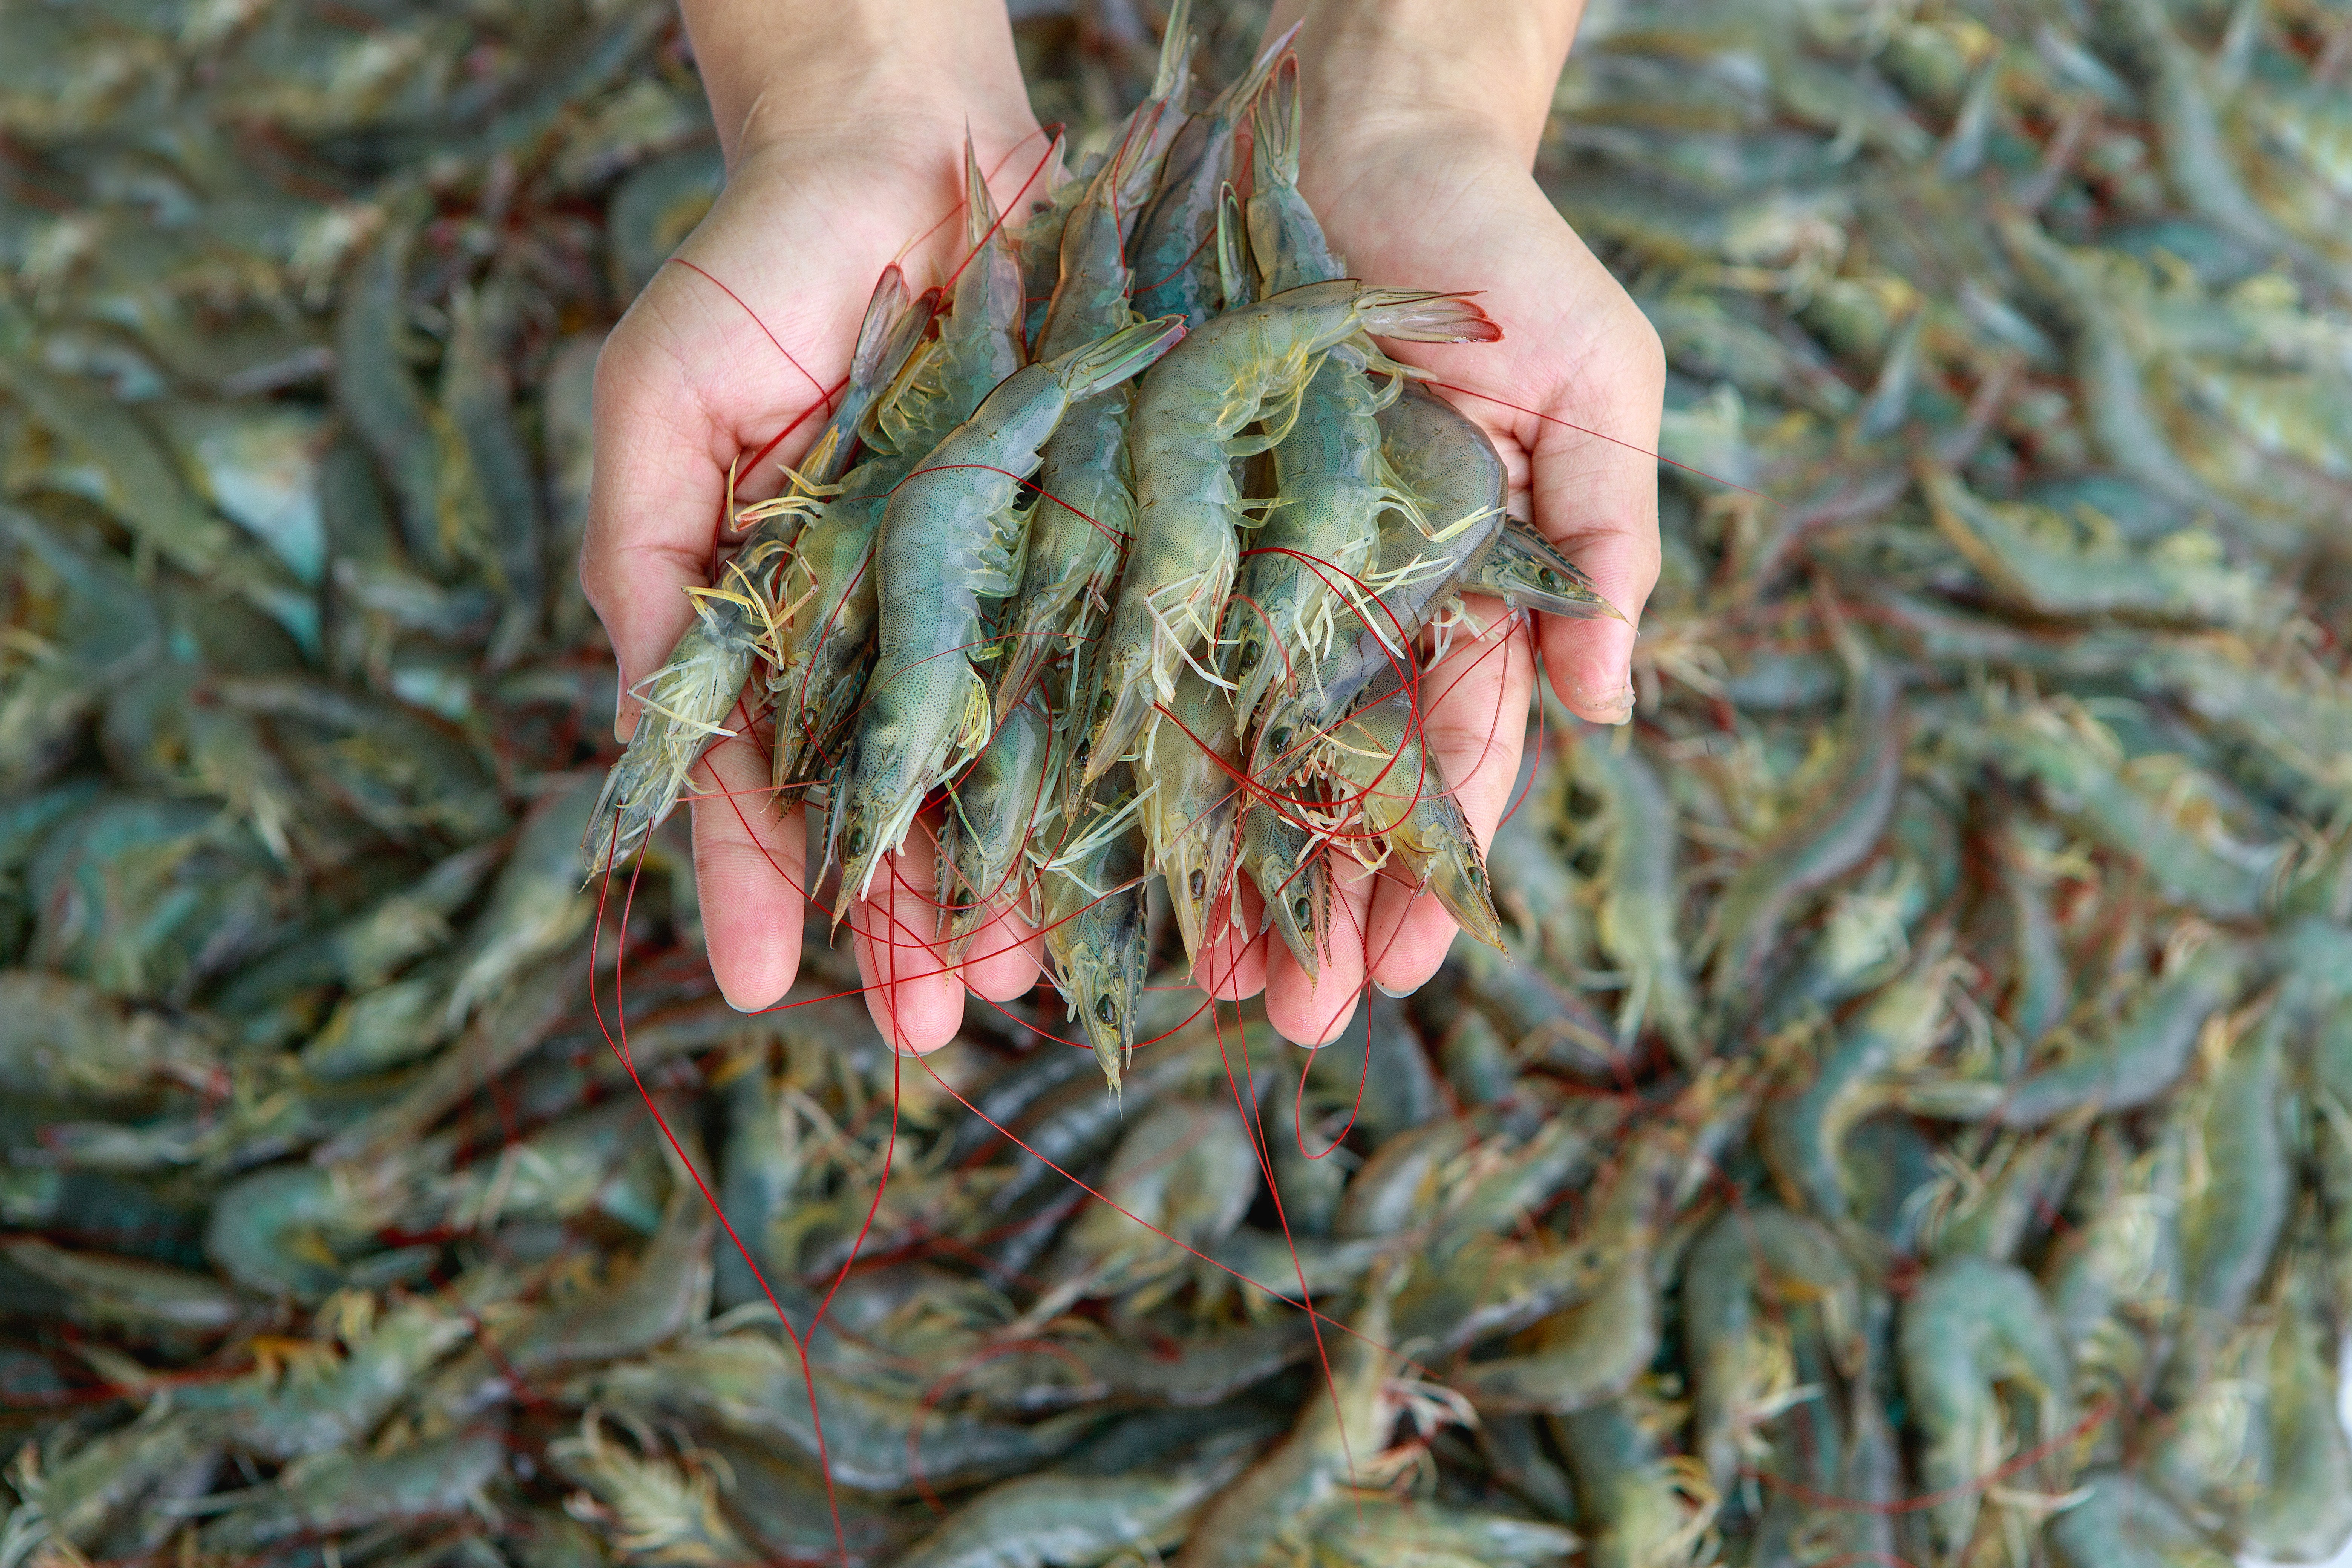 The shrimp industry is not sustainable. Photo: Shutterstock